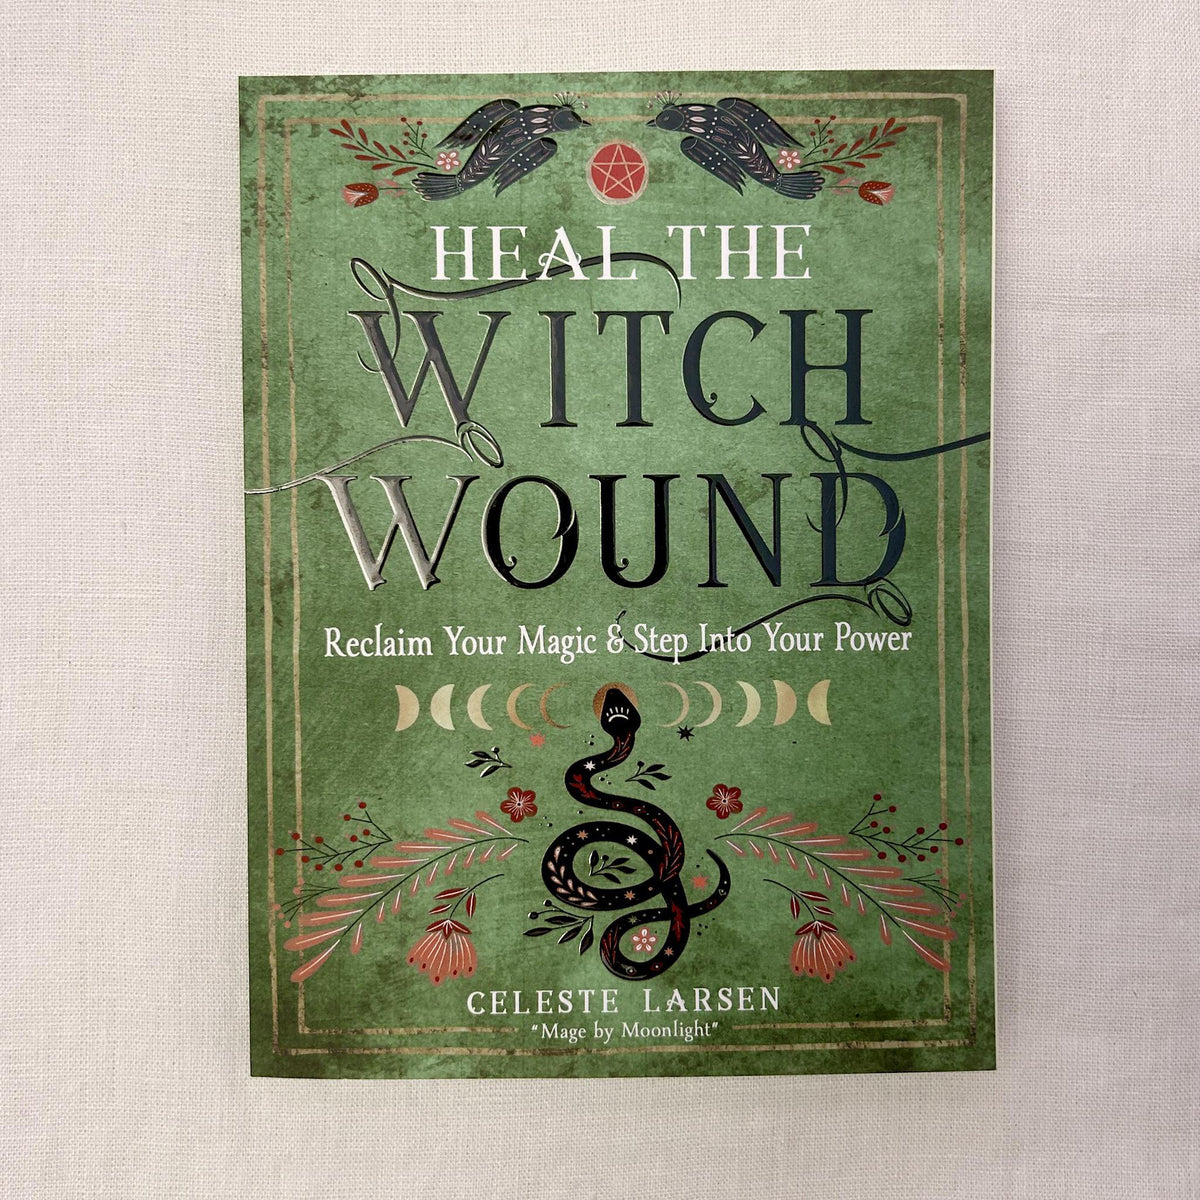 Heal The Witch Wound books: reclain your magic &amp; step into your power